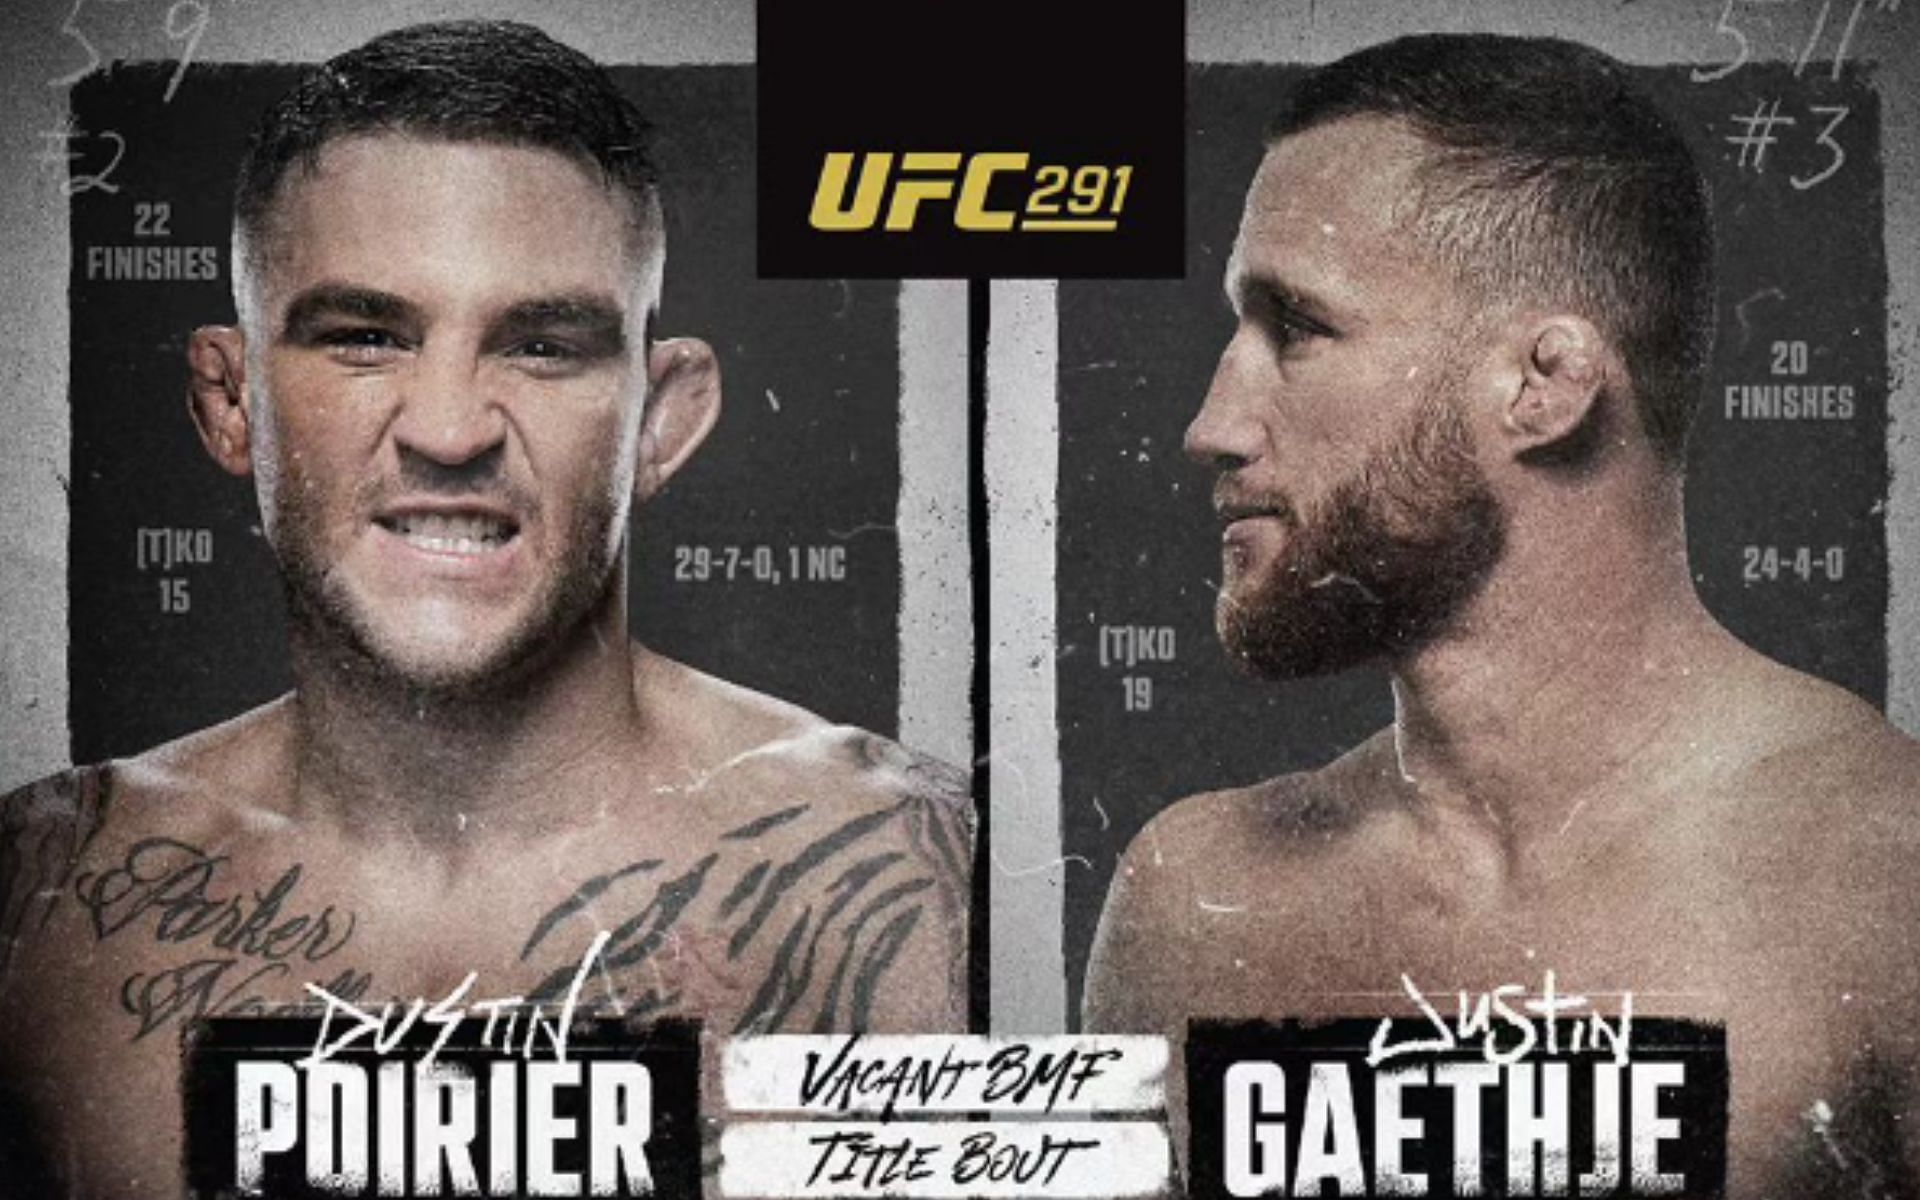 UFC 291 poster featuring Dustin Poirier and Justin Gaethje [Image Courtesy: @dustinpoirier on Instagram]